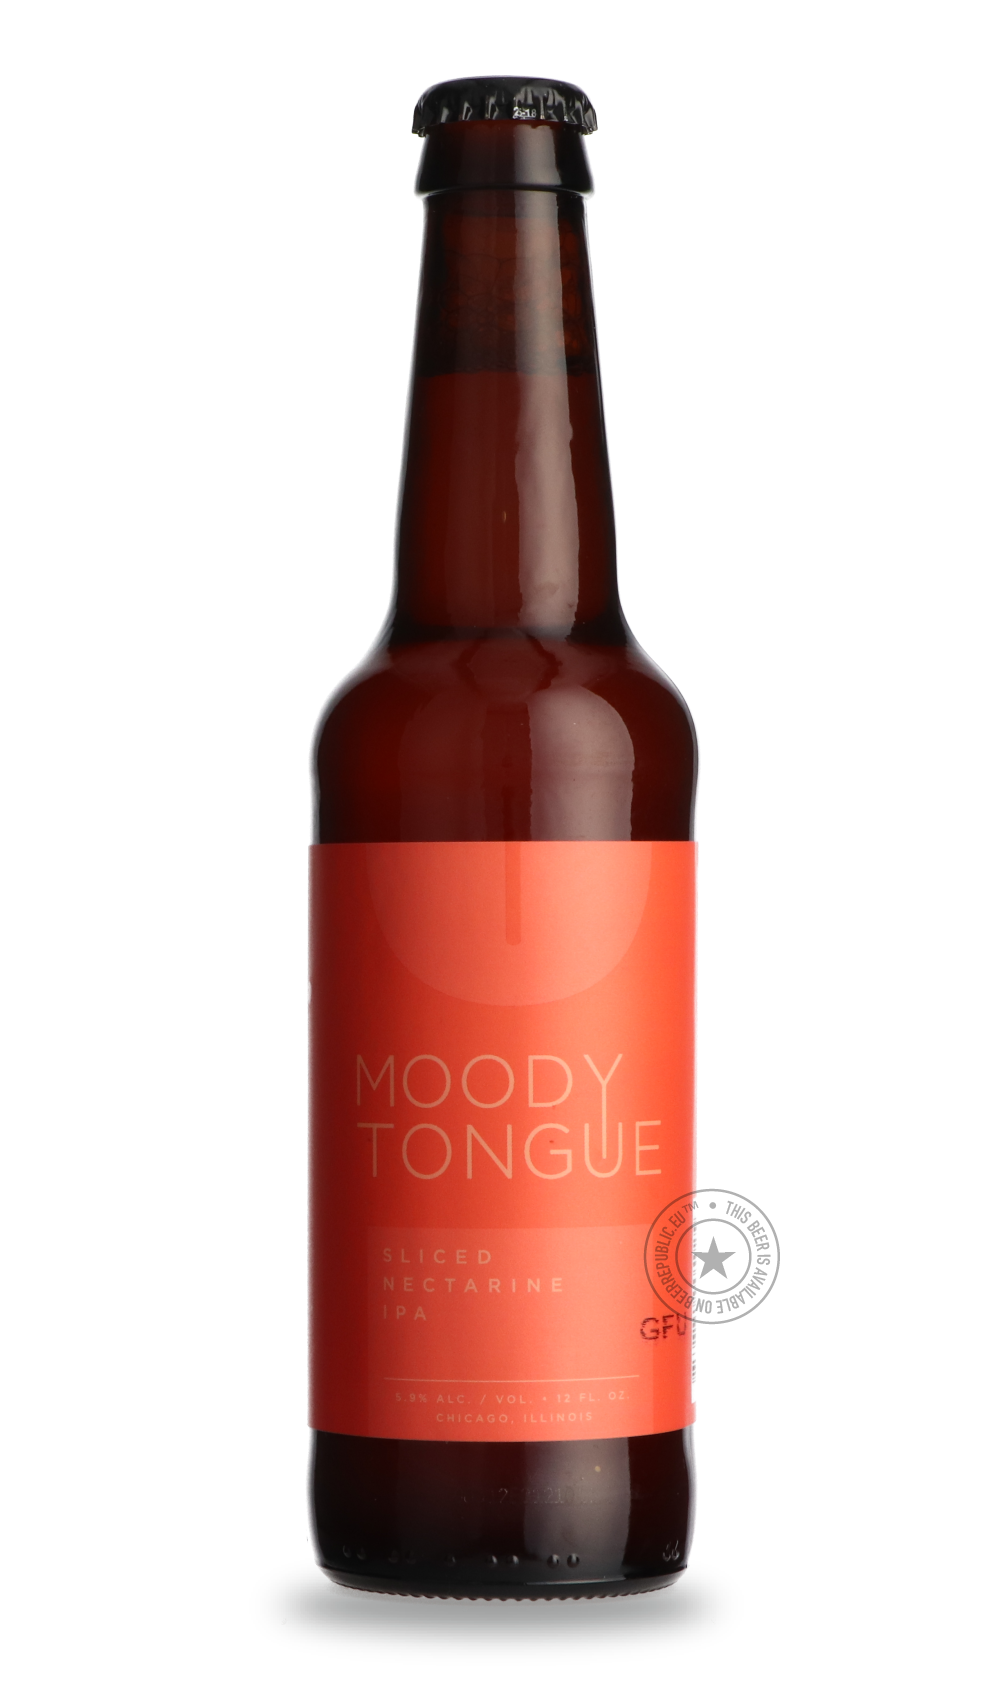 -Moody Tongue- Sliced Nectarine-IPA- Only @ Beer Republic - The best online beer store for American & Canadian craft beer - Buy beer online from the USA and Canada - Bier online kopen - Amerikaans bier kopen - Craft beer store - Craft beer kopen - Amerikanisch bier kaufen - Bier online kaufen - Acheter biere online - IPA - Stout - Porter - New England IPA - Hazy IPA - Imperial Stout - Barrel Aged - Barrel Aged Imperial Stout - Brown - Dark beer - Blond - Blonde - Pilsner - Lager - Wheat - Weizen - Amber - B